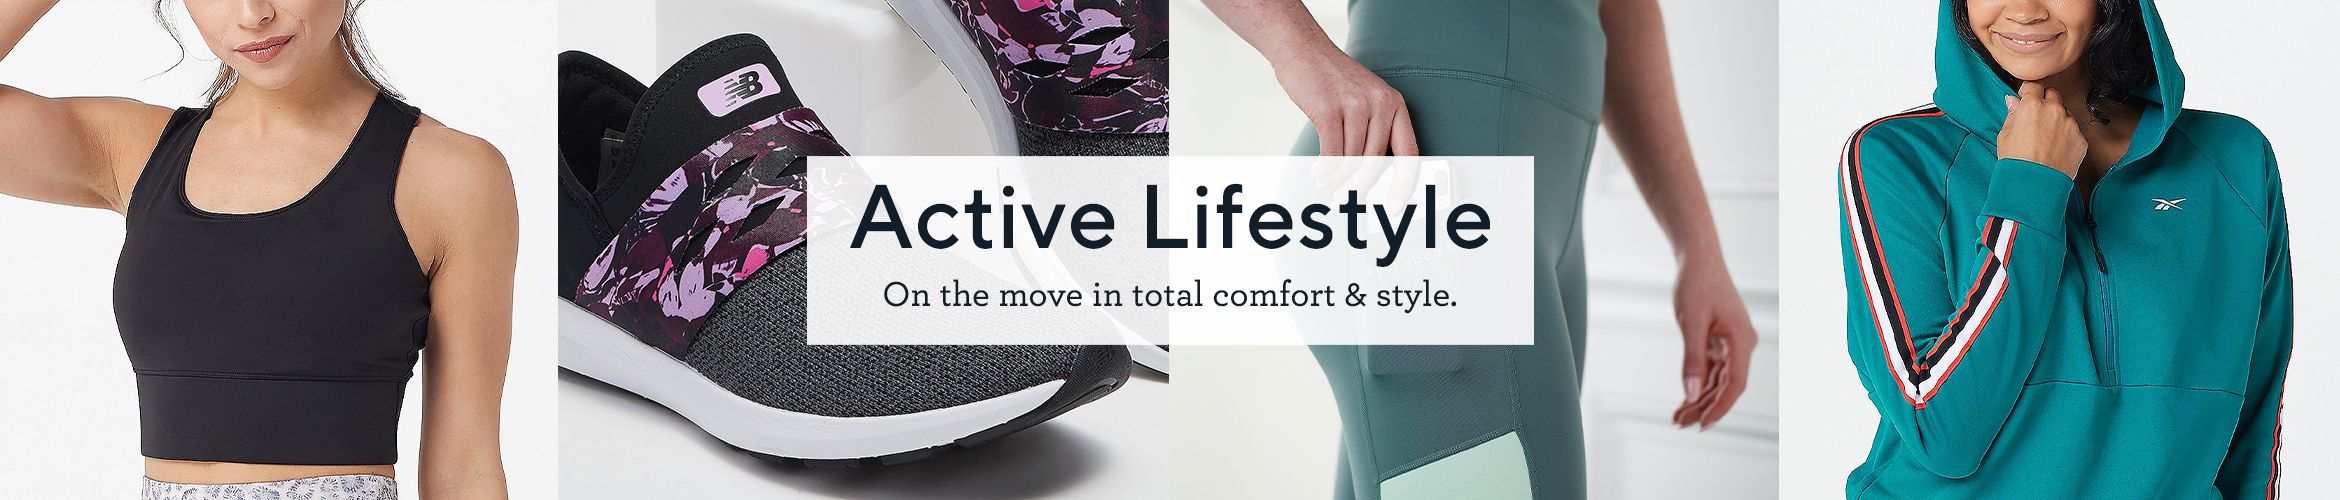 Active Lifestyle on the move in total comfort & style. 